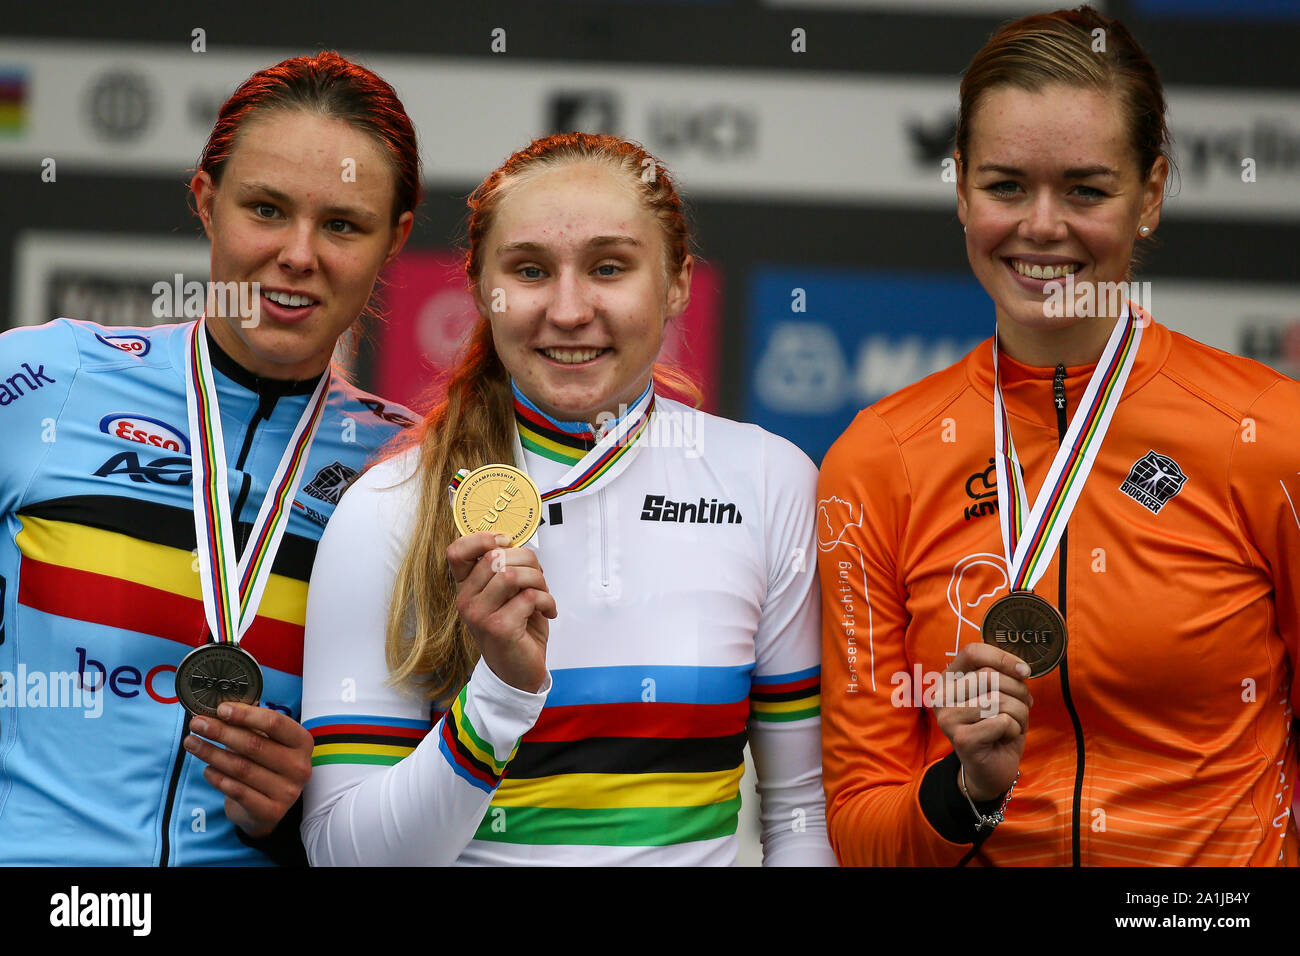 Harrogate, UK. 27th September 2019. Megan Jastrab  of the USA takes Gold Julie De Wilde  of Belgium Silver and Lieke Nooijen of the Netherlands takes Bronze in the 2019 UCI Road World Championships Womens Junior Road Race. September 27, 2019 Credit Dan-Cooke/Alamy Live News Stock Photo